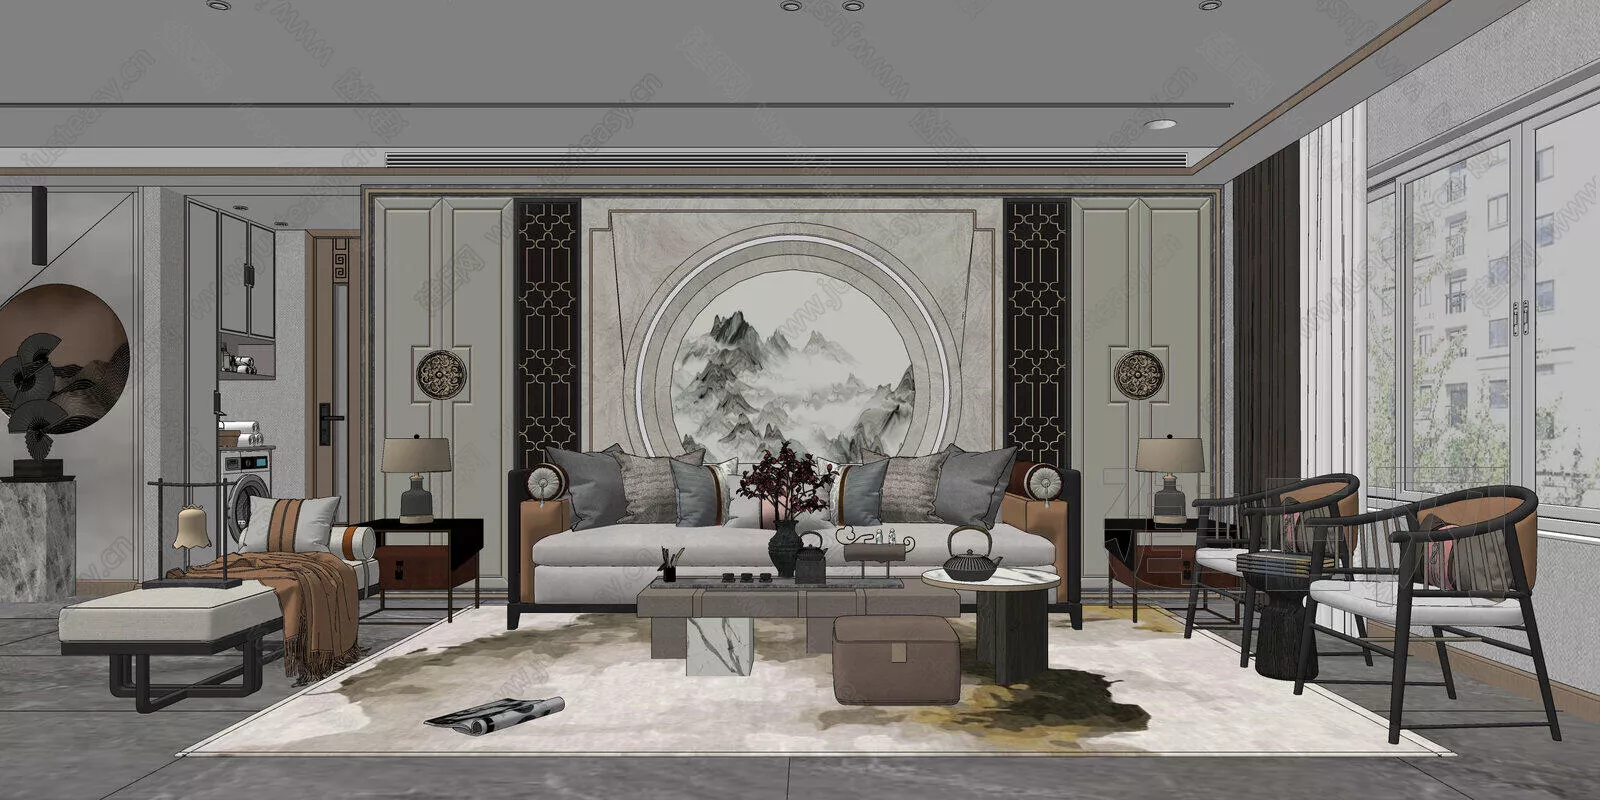 CHINESE LIVING ROOM - SKETCHUP 3D SCENE - ENSCAPE - 109331549